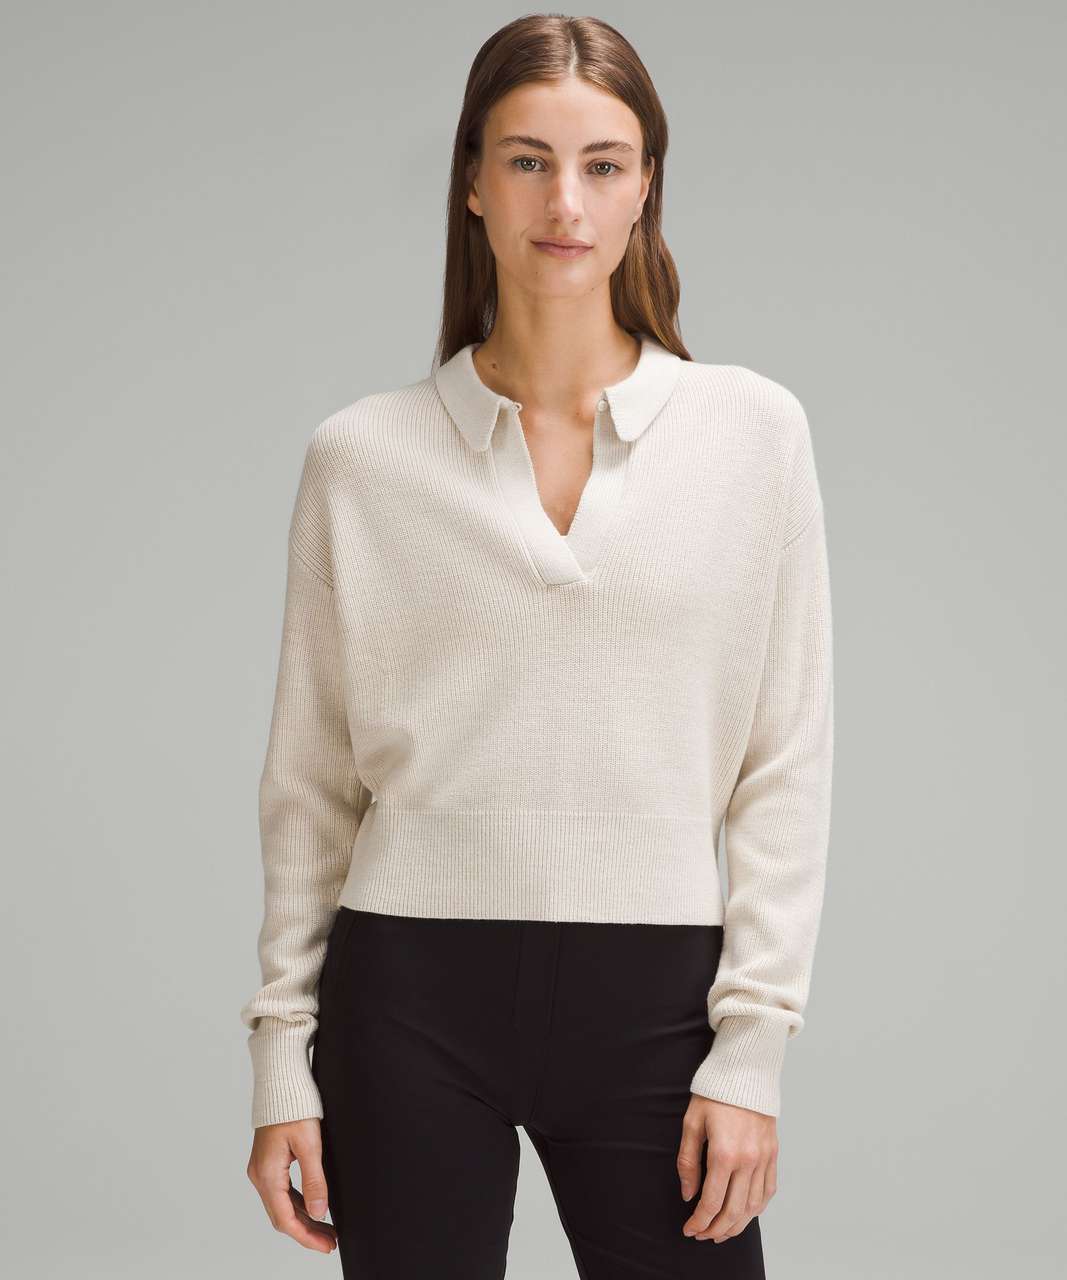 Ivory Sweater Top - Long Sleeve Sweater Top - Collared Sweater - Lulus